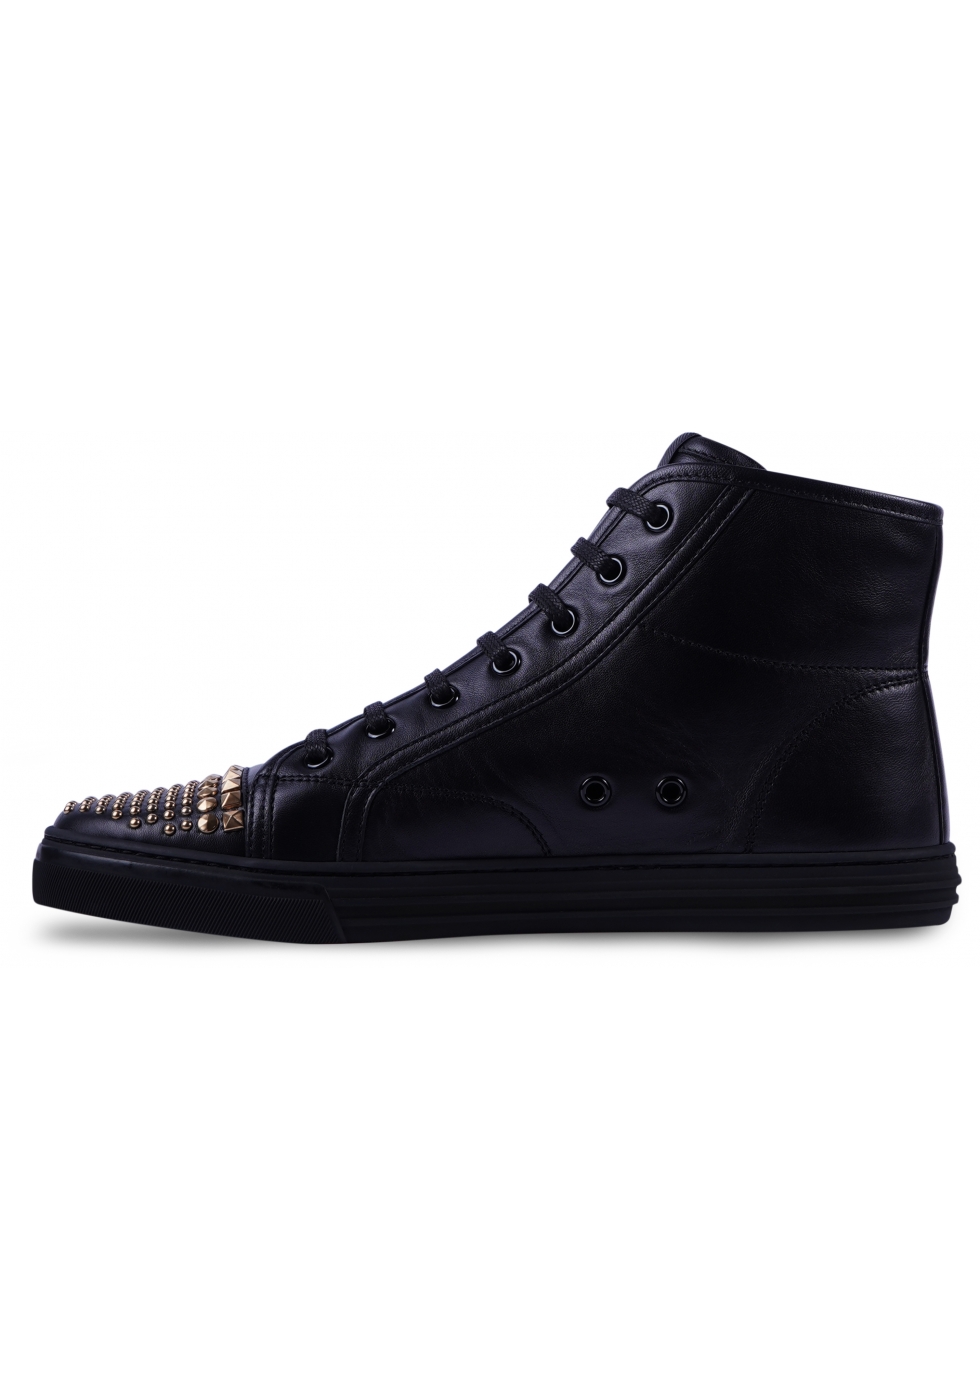 Gucci Women's fashion high top sneakers shoes in black leather with ...